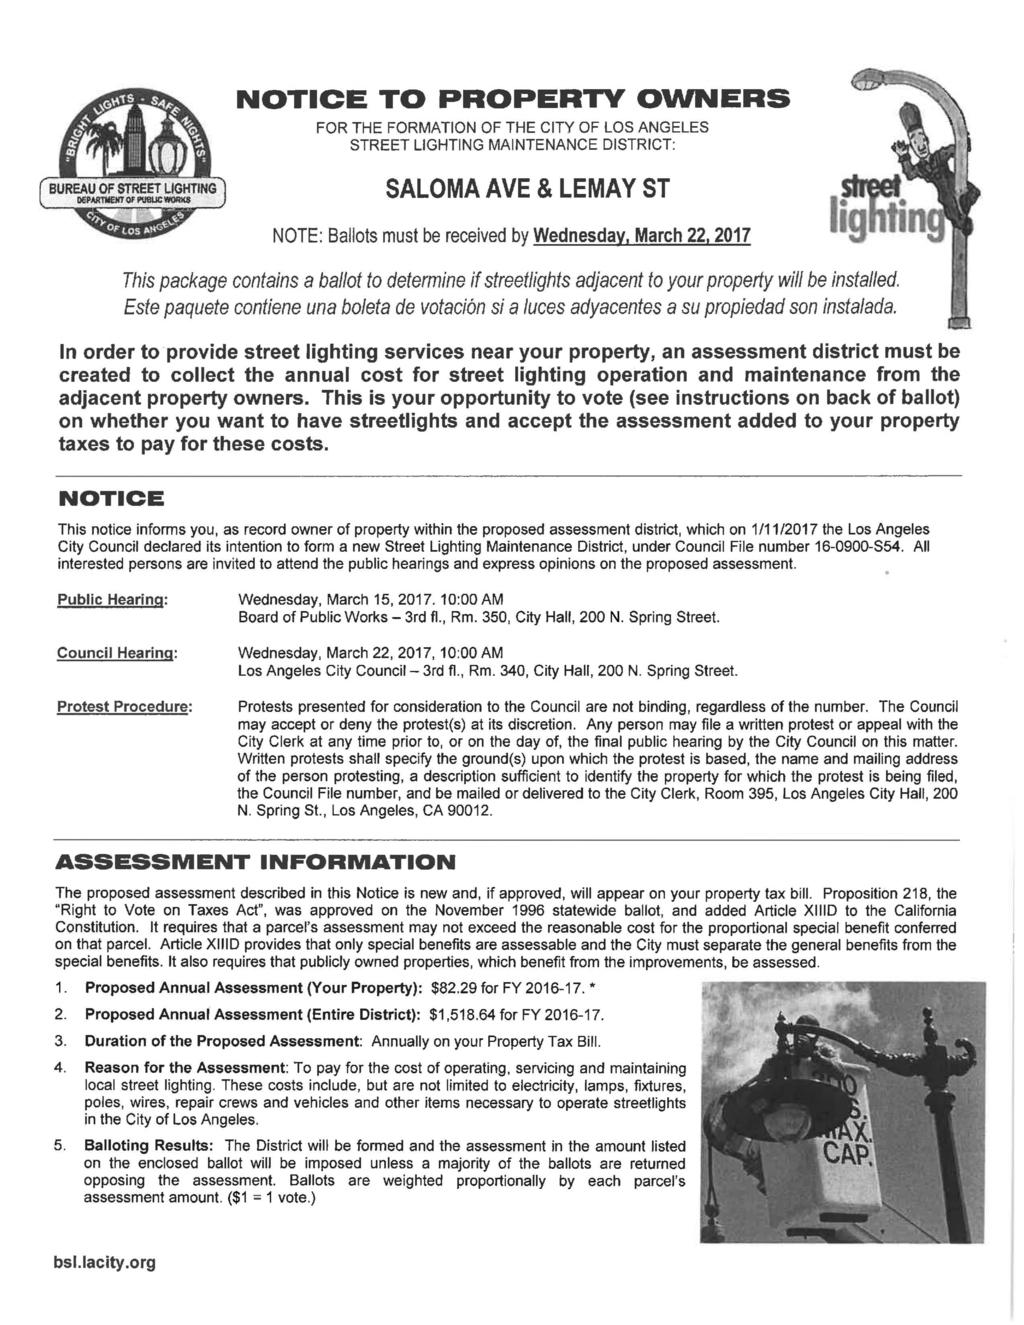 NOTICE TO PROPERTY OWNERS *1 FOR THE FORMATION OF THE CITY OF LOS ANGELES STREET LIGHTING MAINTENANCE DISTRICT: 1 BUREAU OF STREET LIGHTING DEPART!